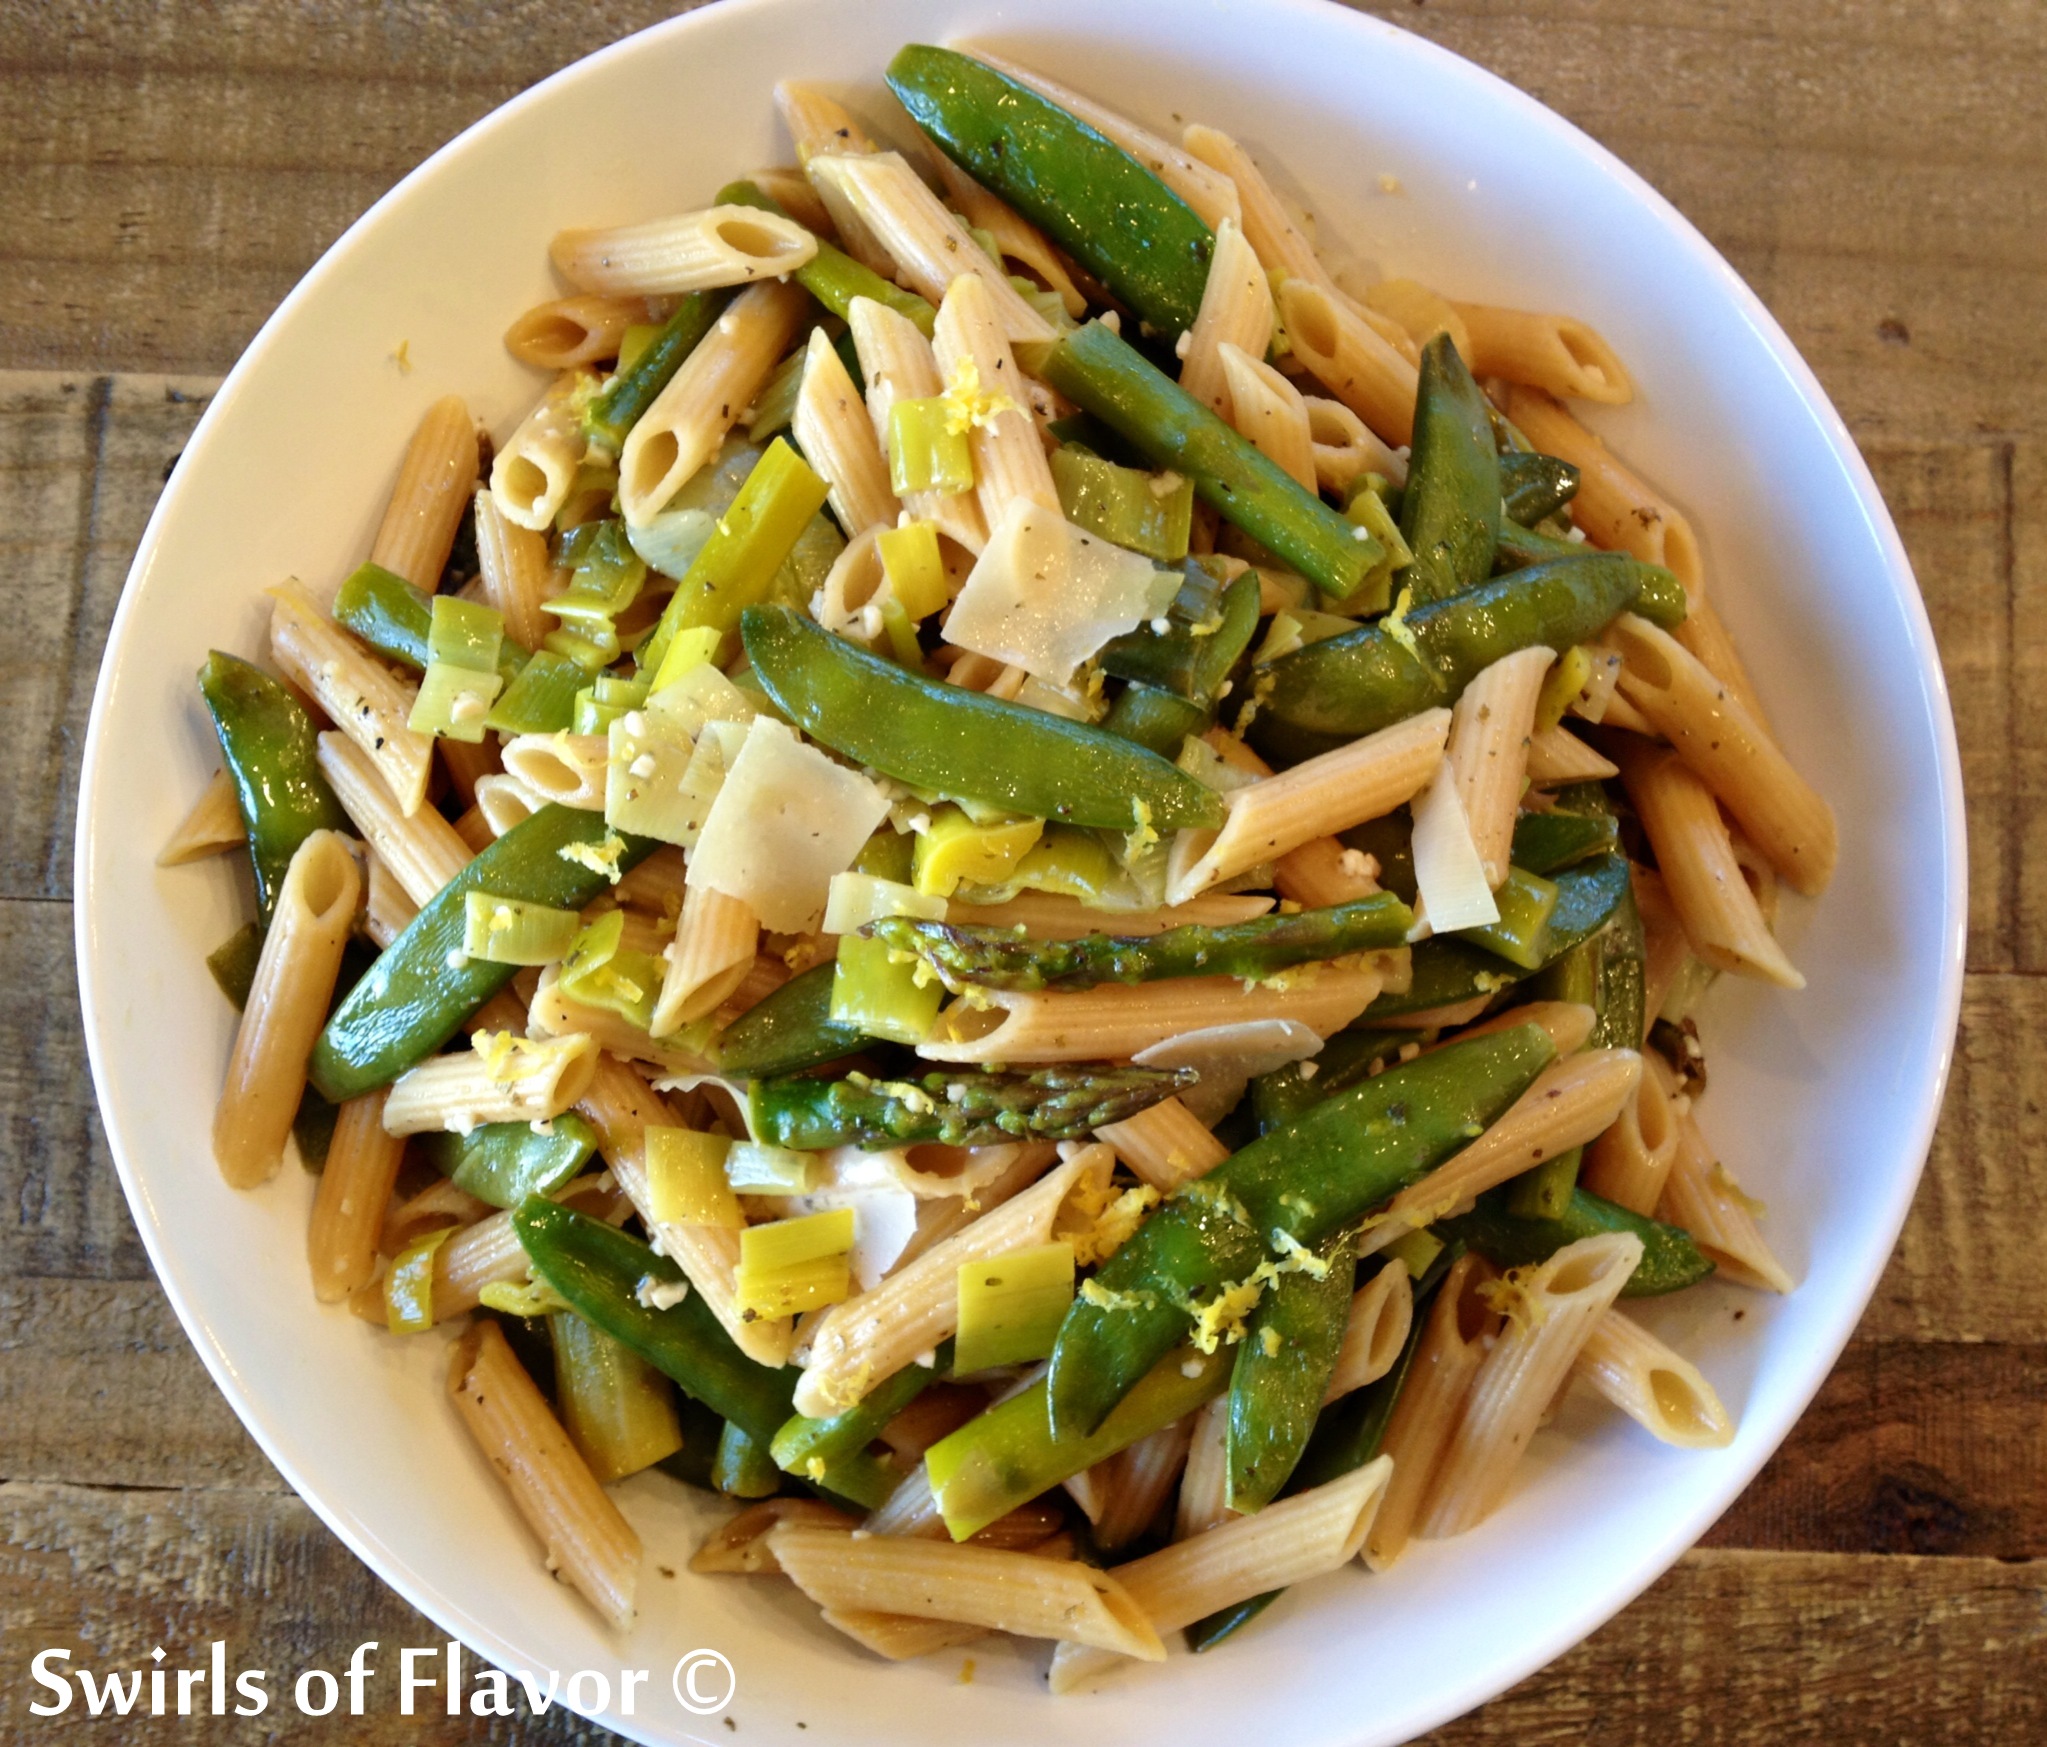 One Pot Springtime Pasta Primavera, is an easy pasta recipe bursting with the flavors of springtime vegetables.Â  Pasta cooks together in one pot with sugar snap peas, asparagus, leeks and seasonings, forming a light buttery brothy sauce. Perfect for springtime!